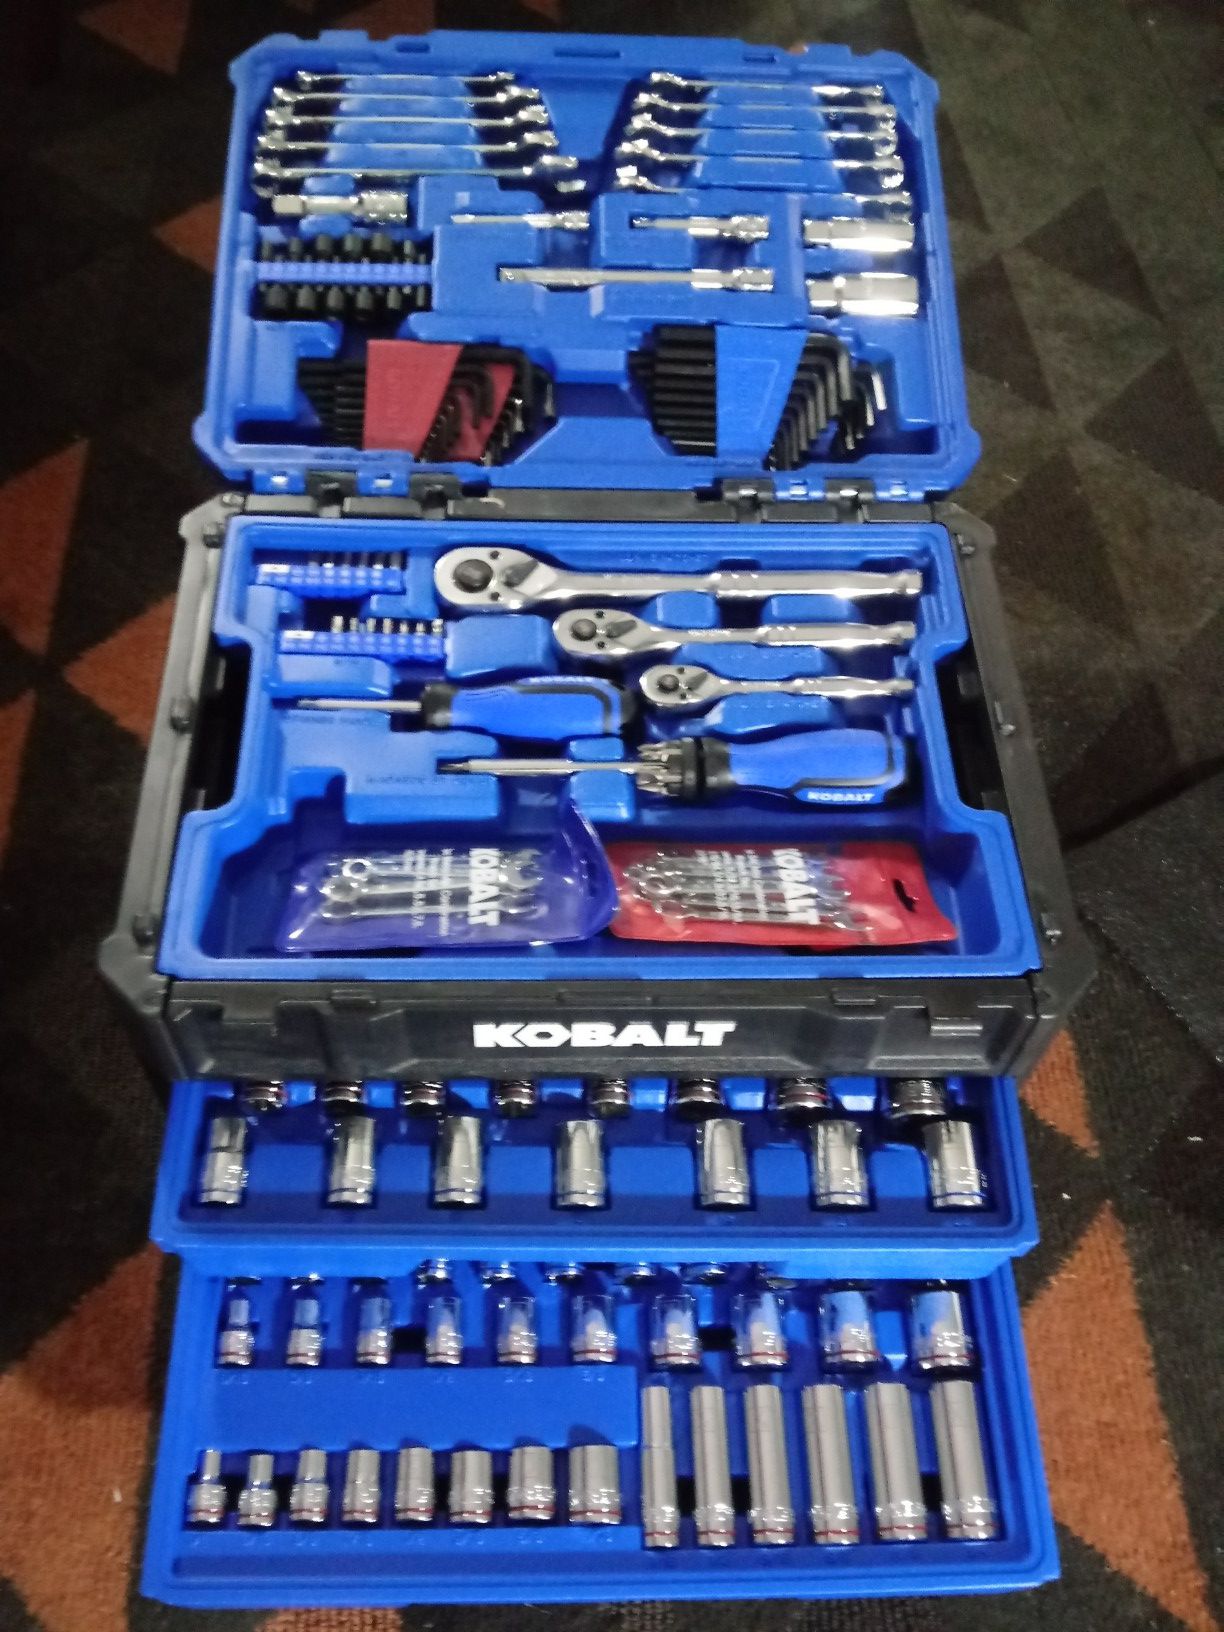 NEW NEVER USED KOBALT TOOLBOX WITH TOOLS